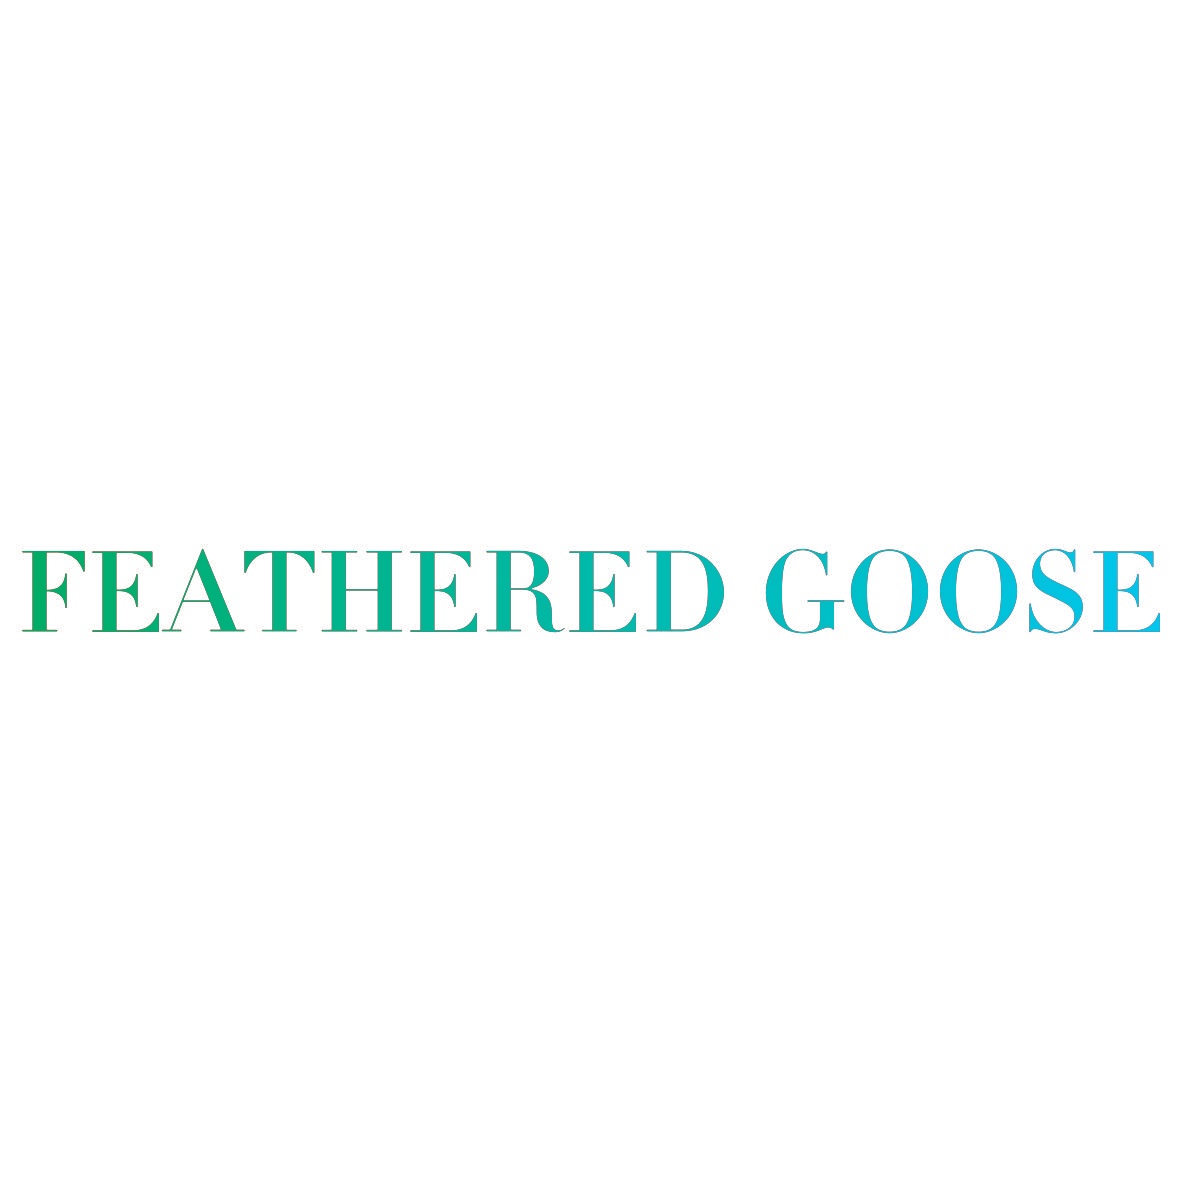 FEATHERED GOOSE